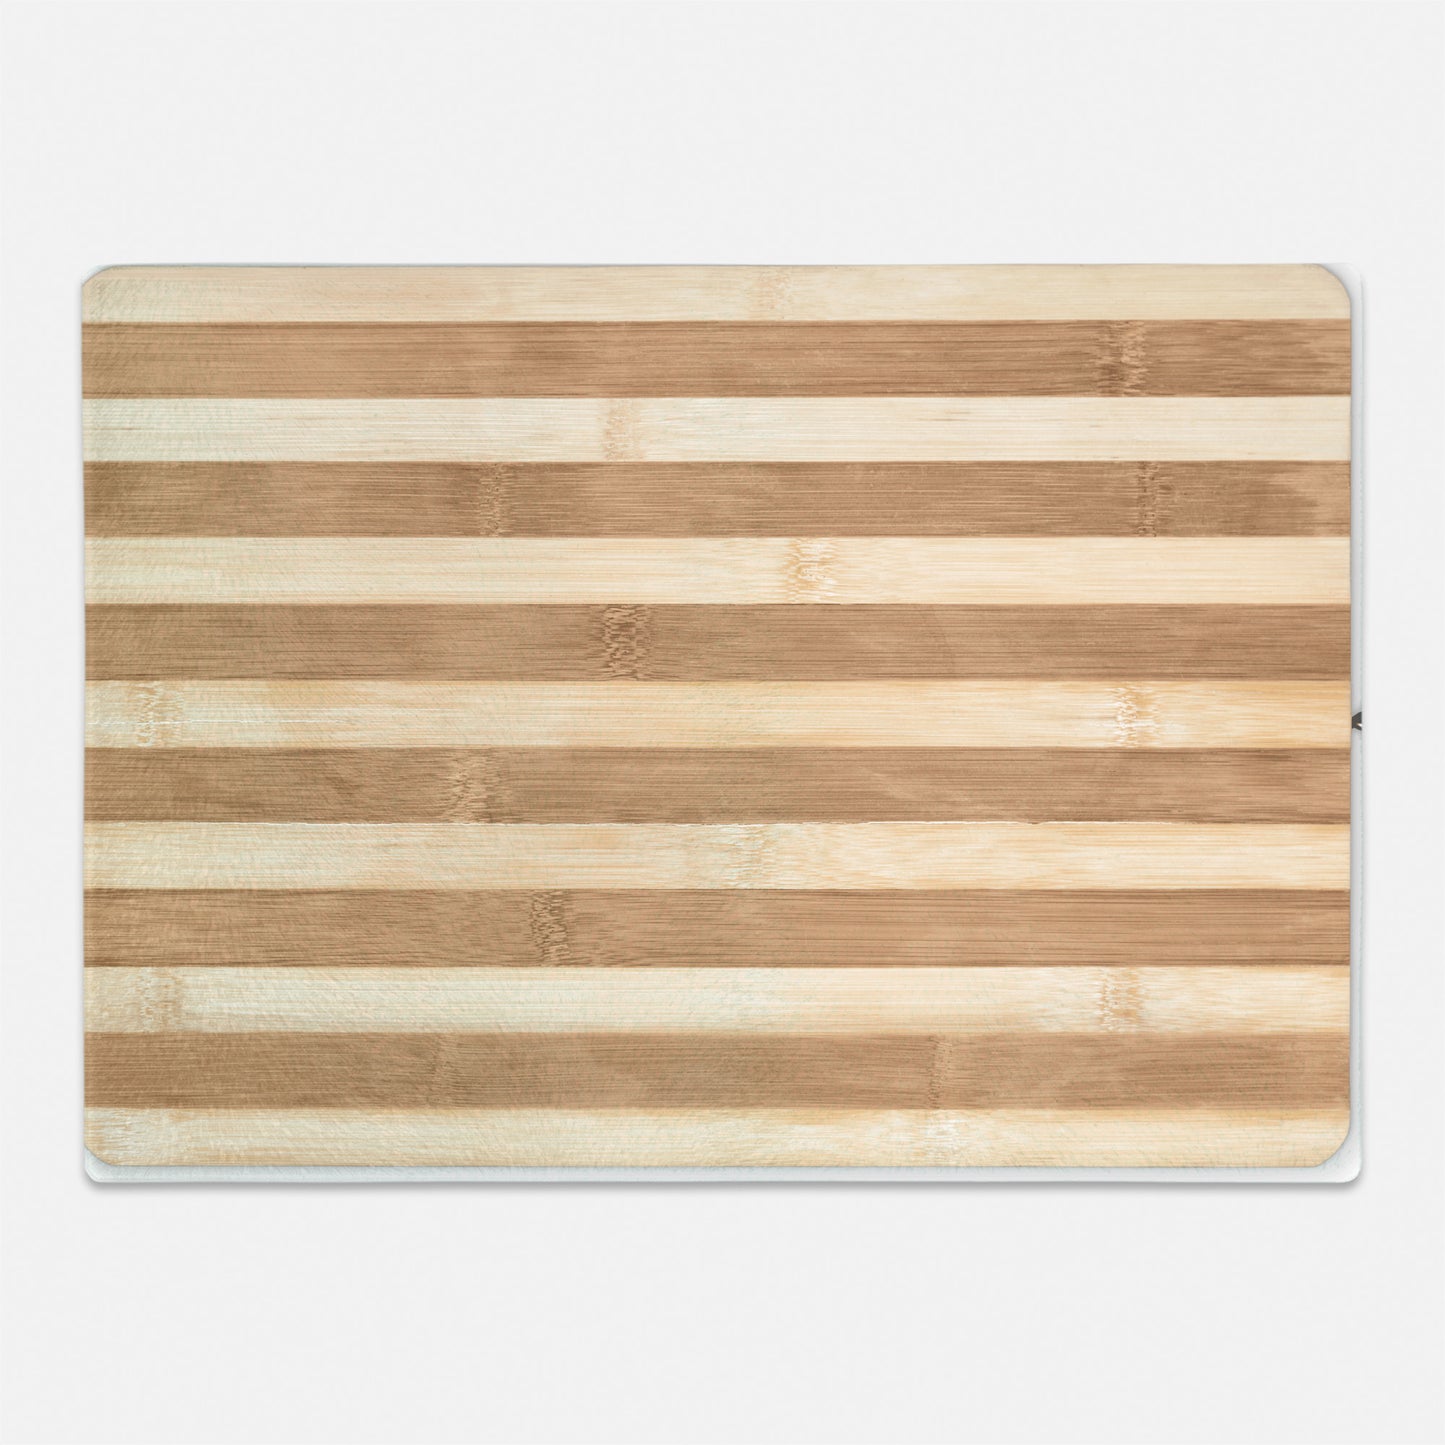 Two toned wooden cutting board image on a glass cutting board trick everyone with this great gift idea